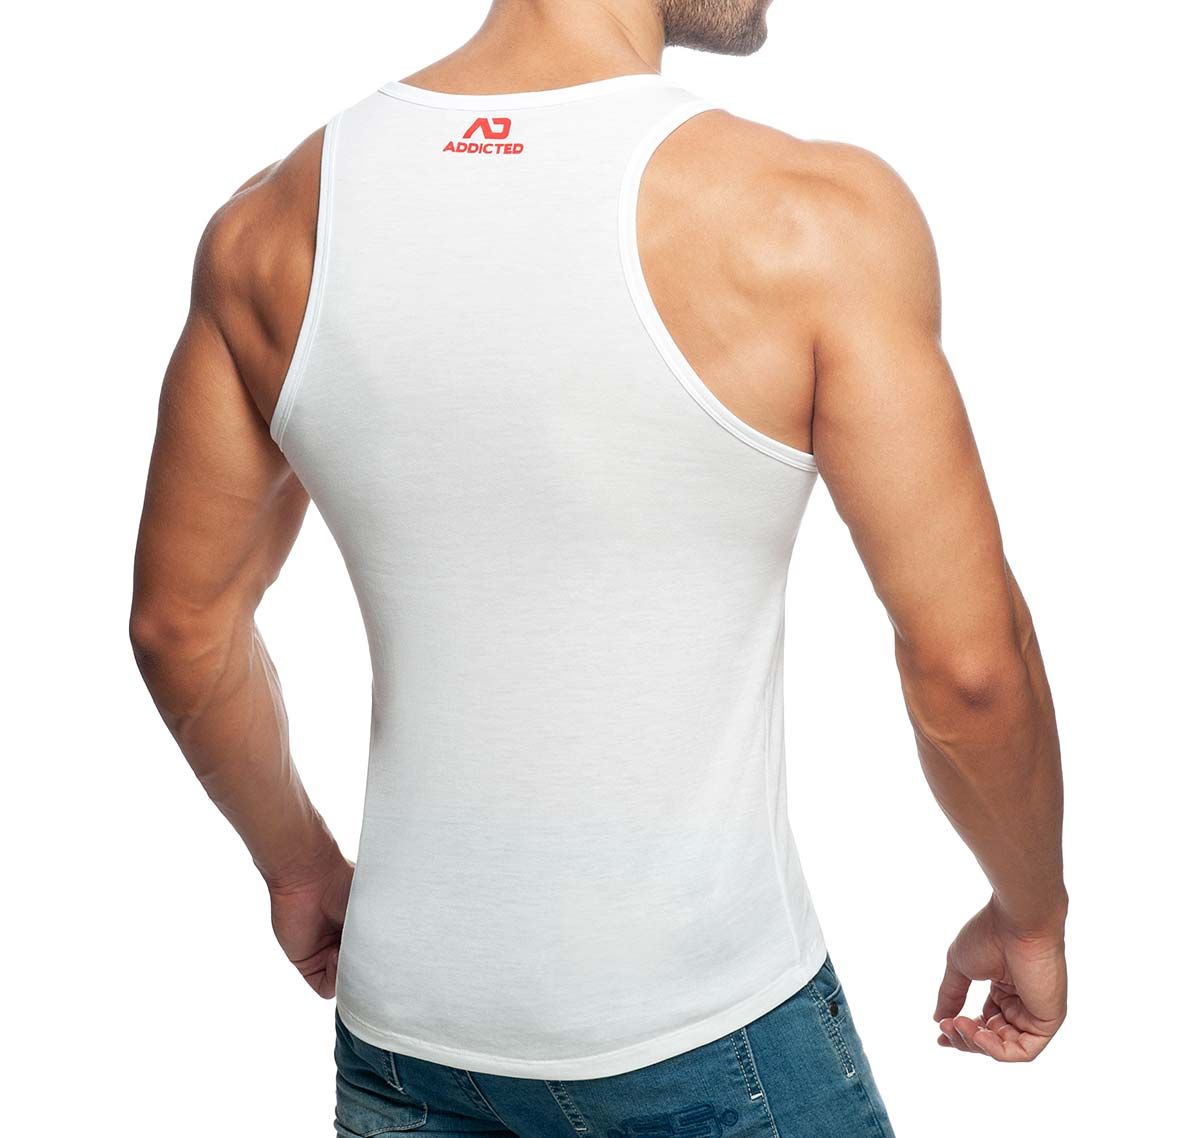 Addicted Tank Top ON THE MAKE TANKTOP AD914, white